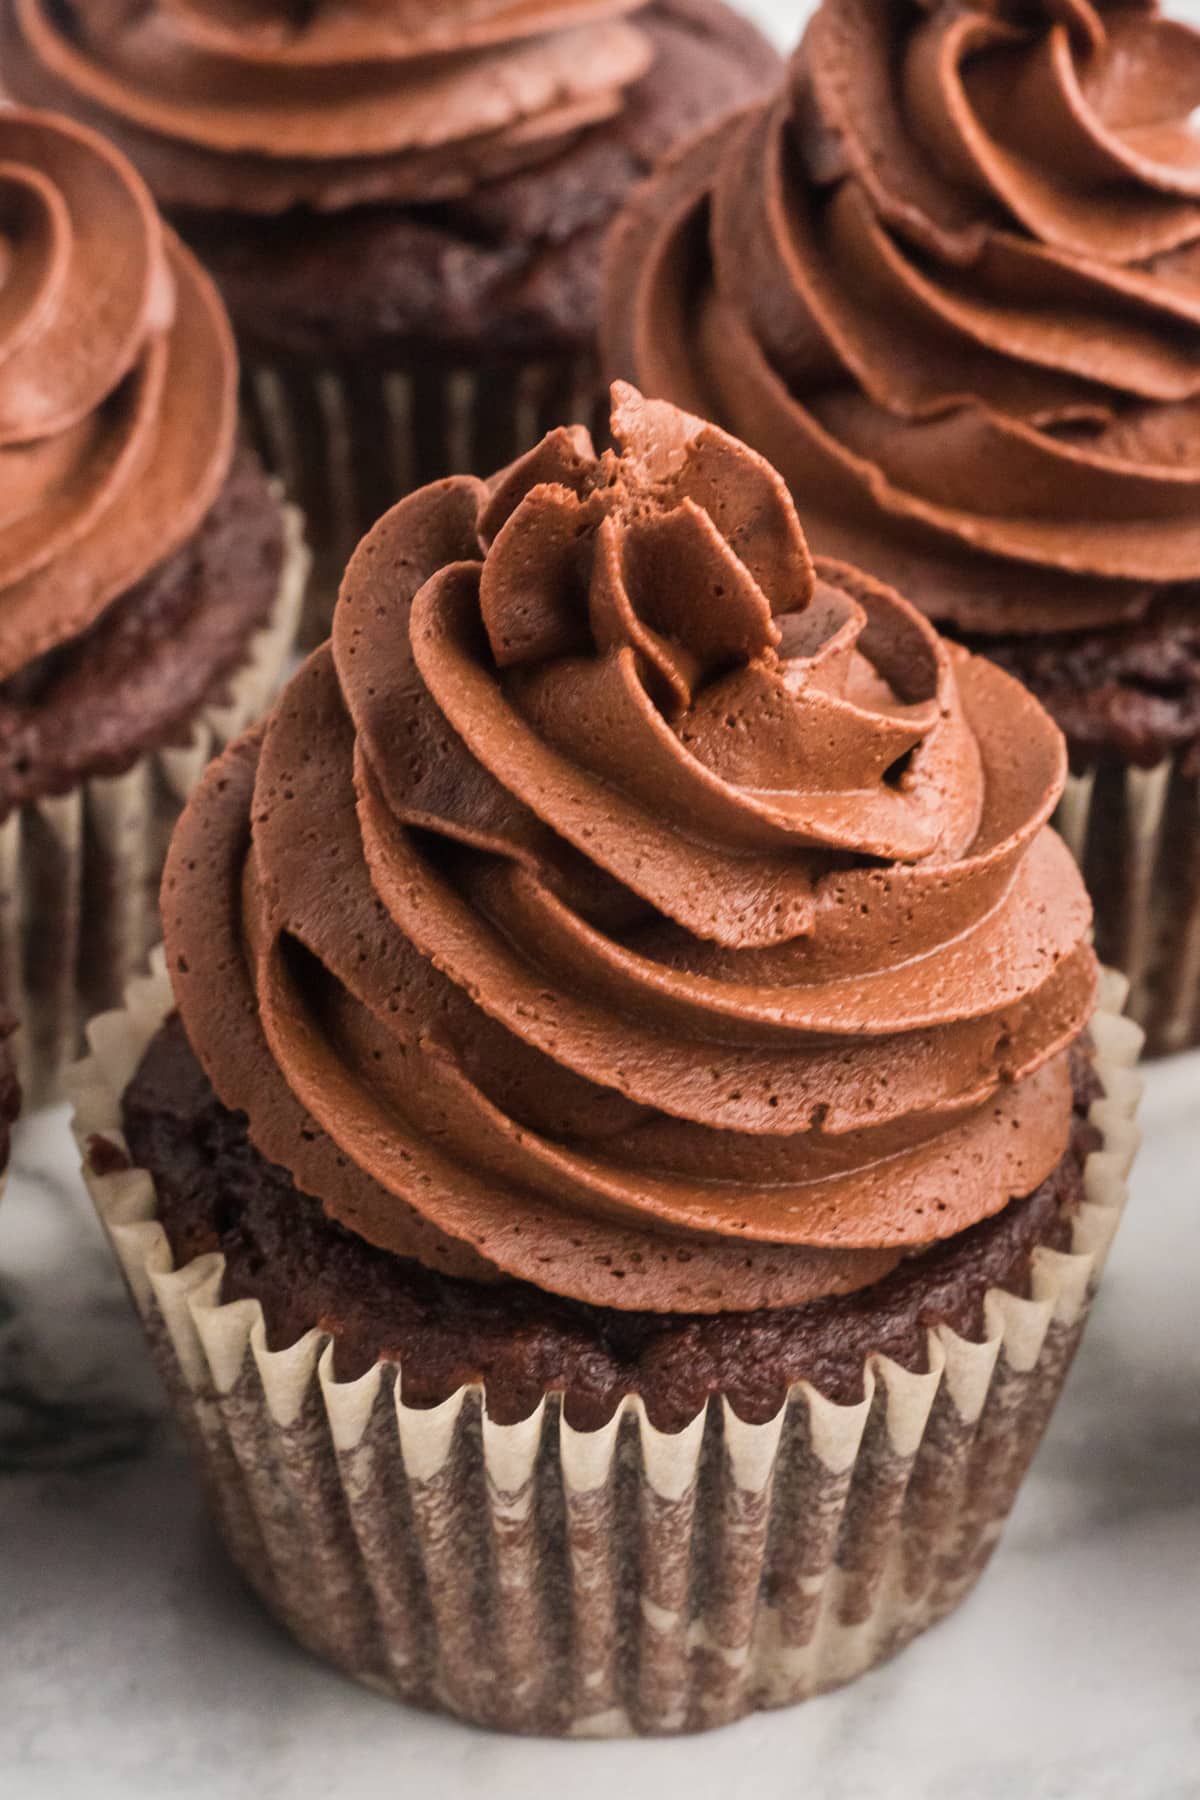 A chocolate cupcake topped with chocolate ganache